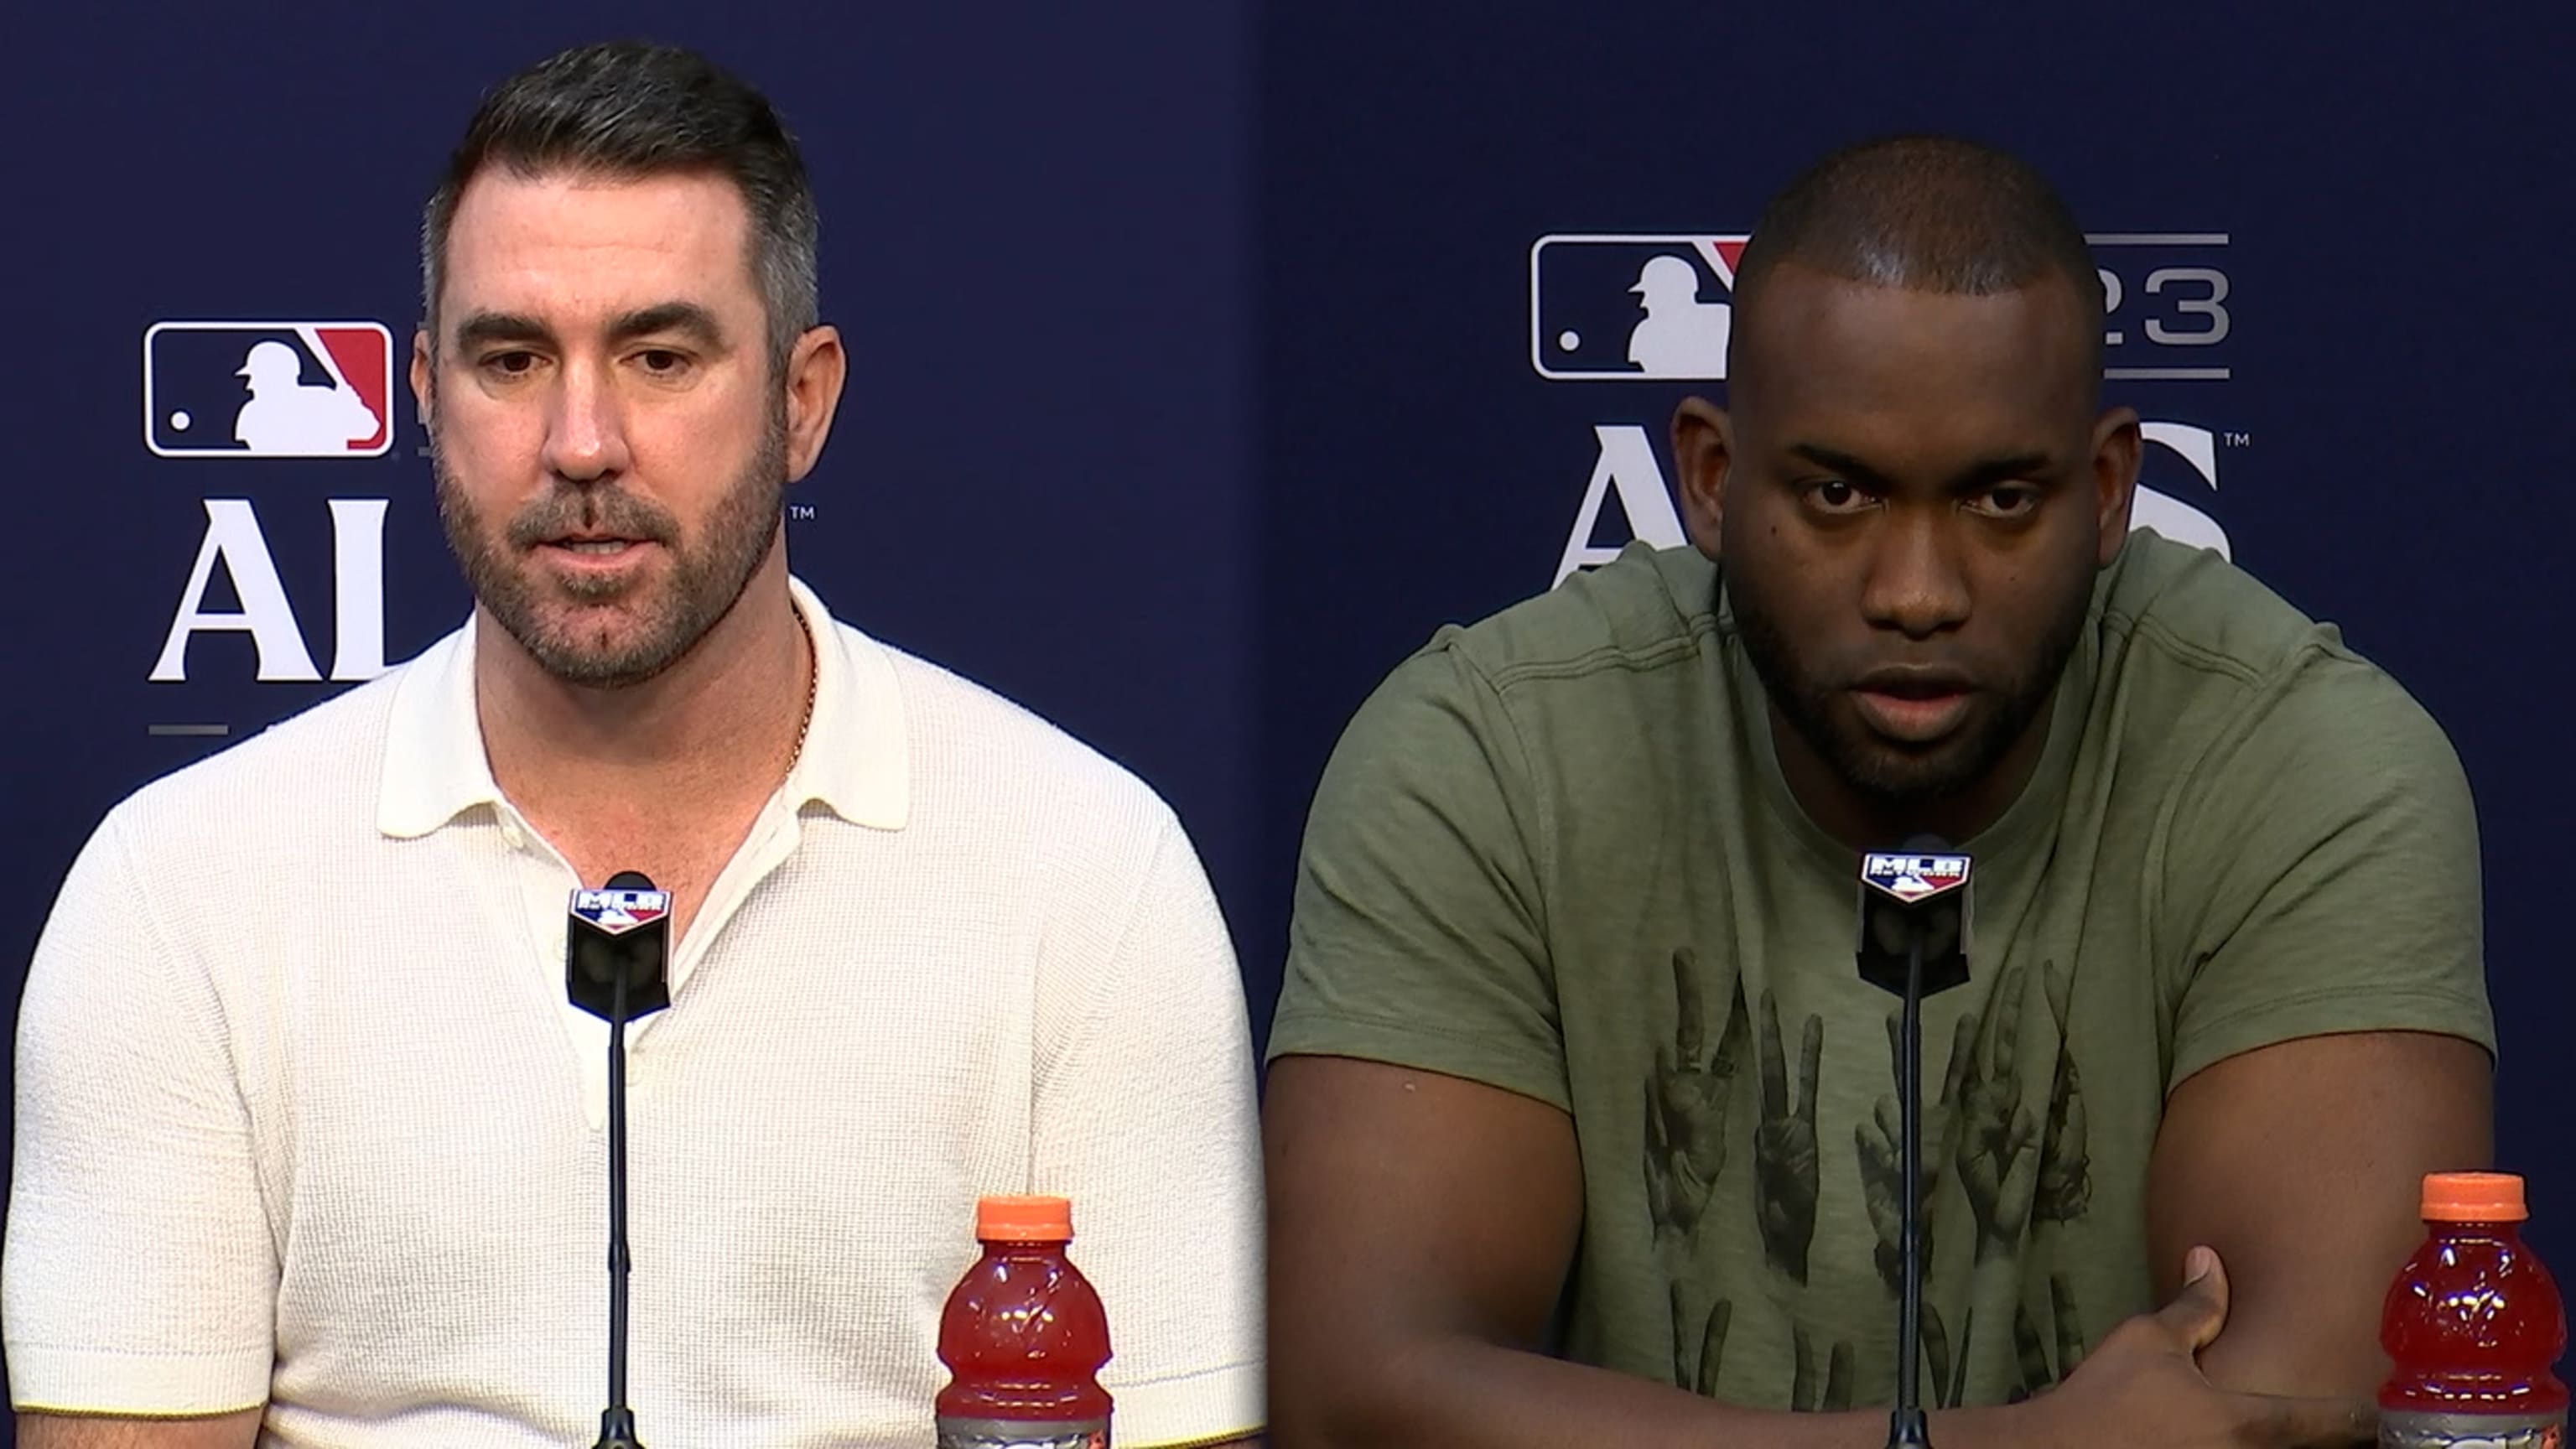 Yordan Alvarez changes Astros' mood, fate with one swing in Game 1 of ALDS